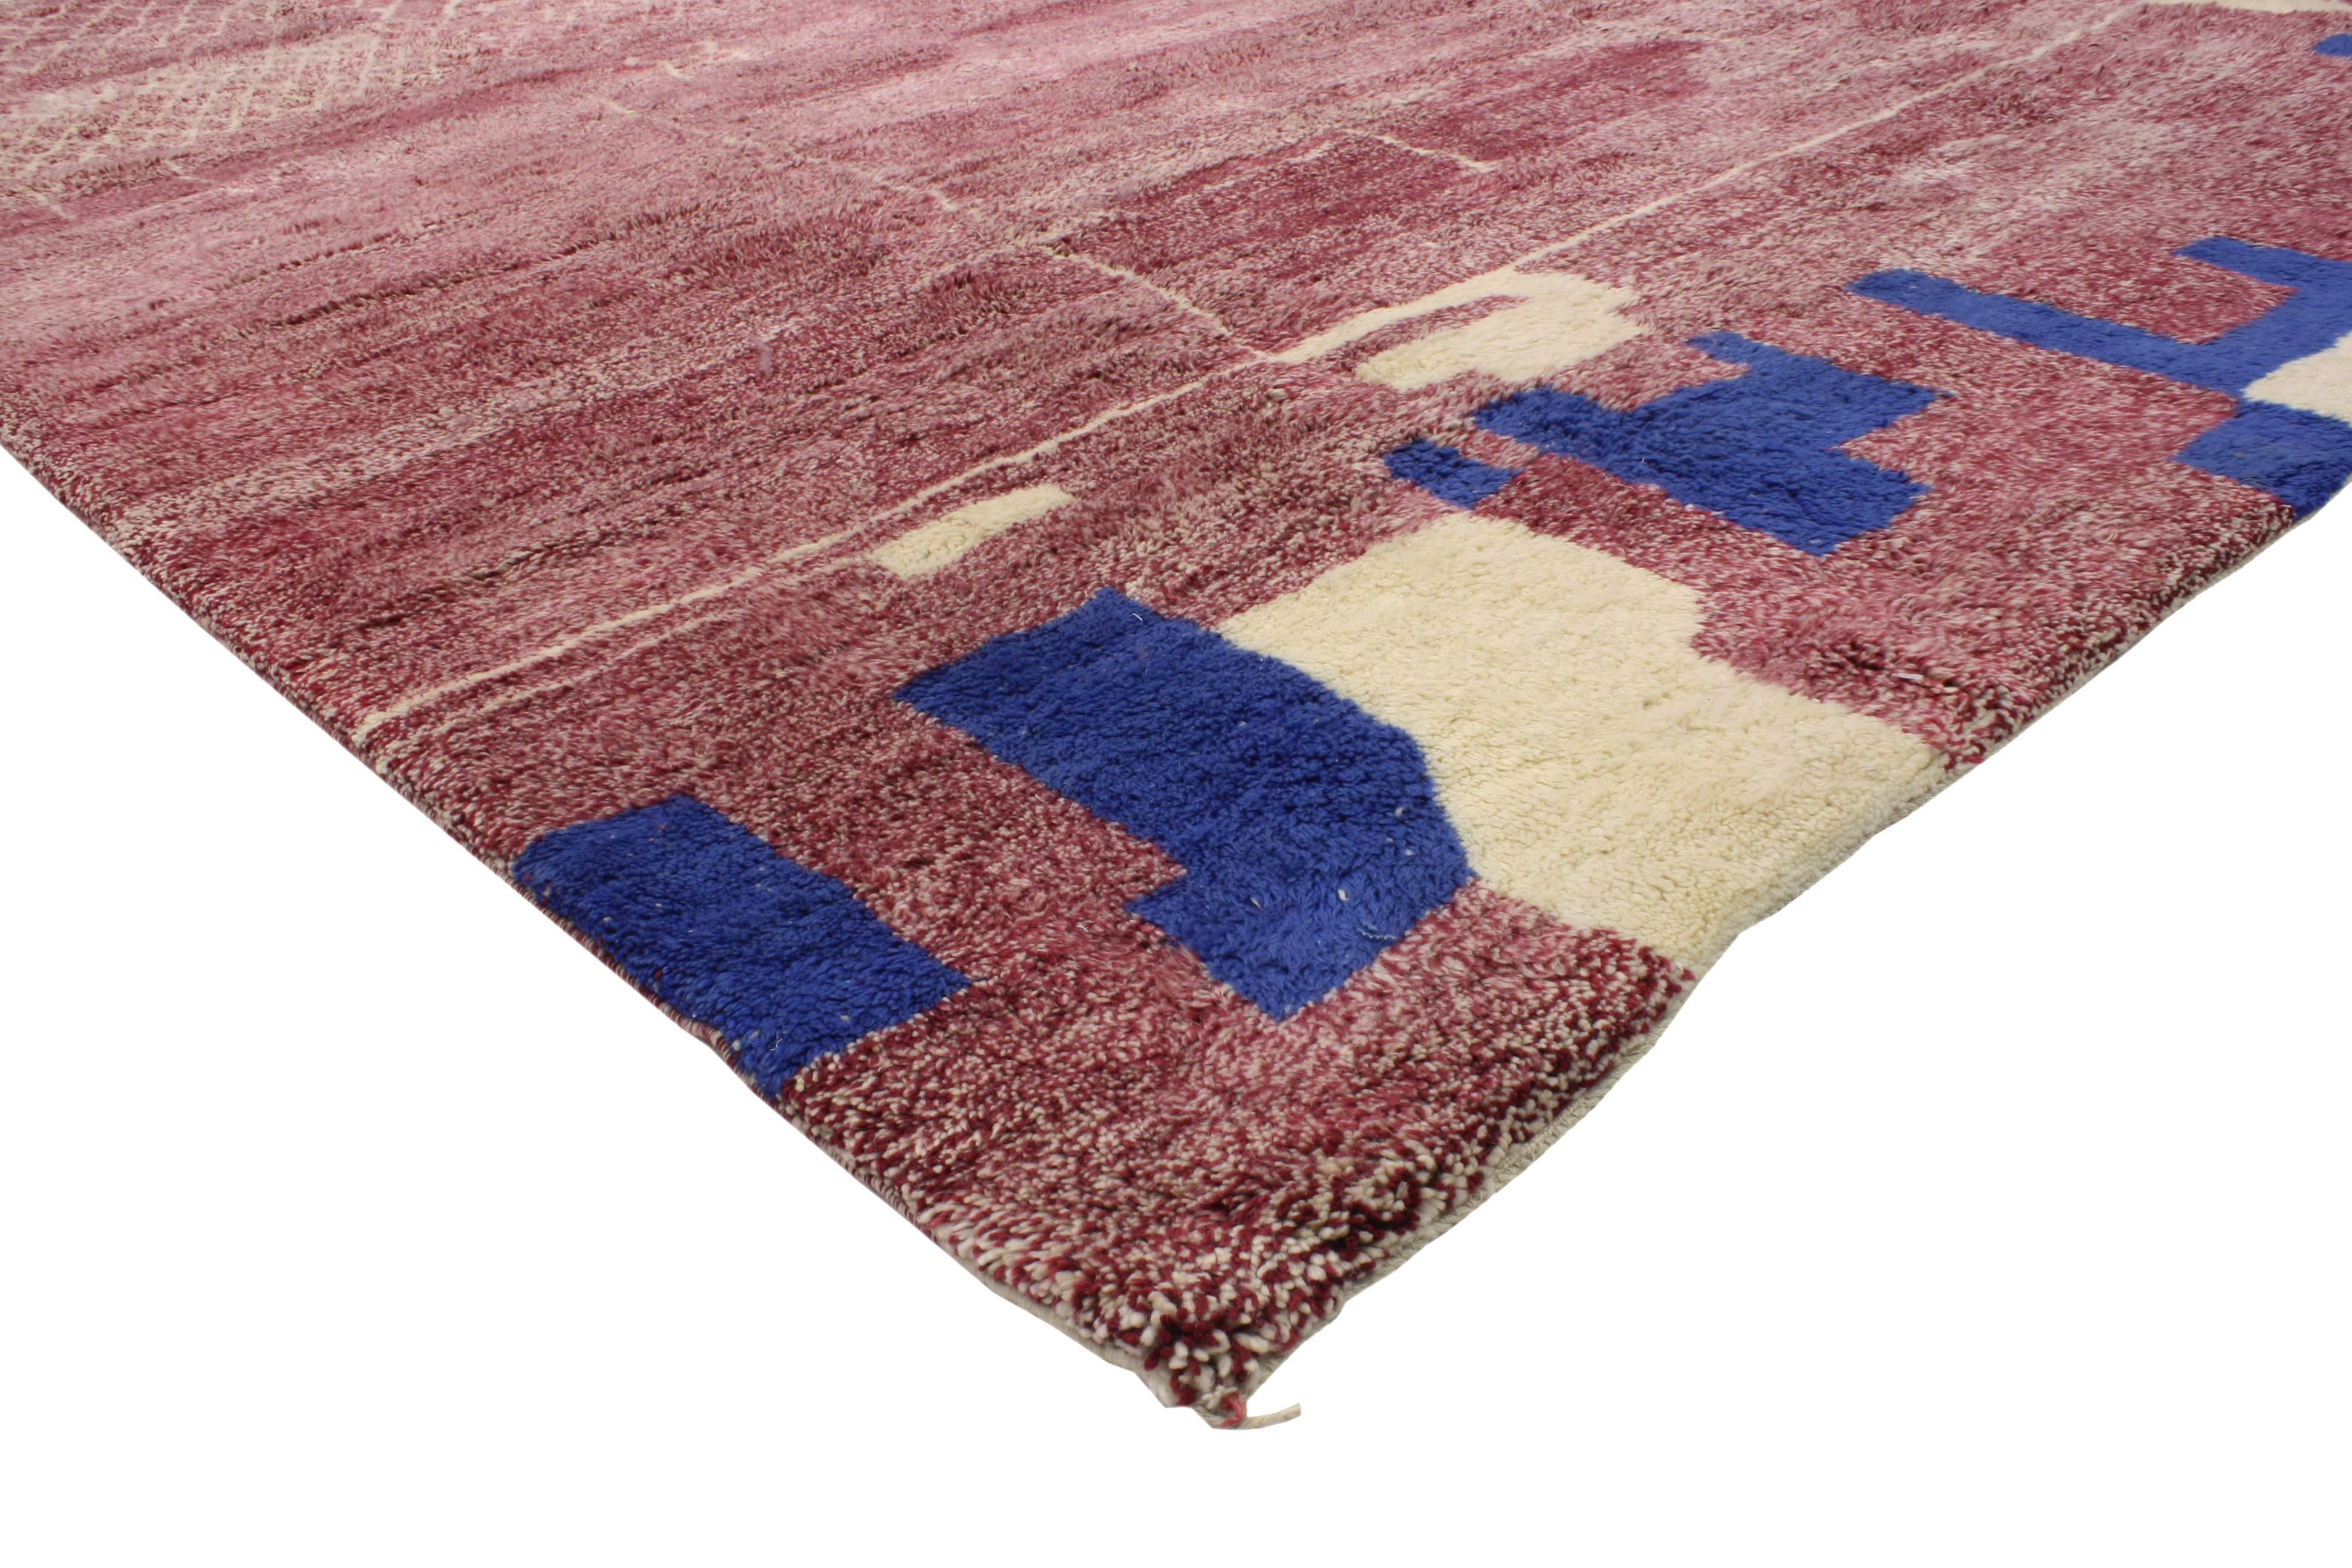 Boasting beautiful colors and impeccable weaving, this contemporary boho chic Moroccan style rug features Modern Tribal Design. Rendered in variegated shades of deep red, pink, cream and blue. The colors combined with the ancient Moroccan symbols